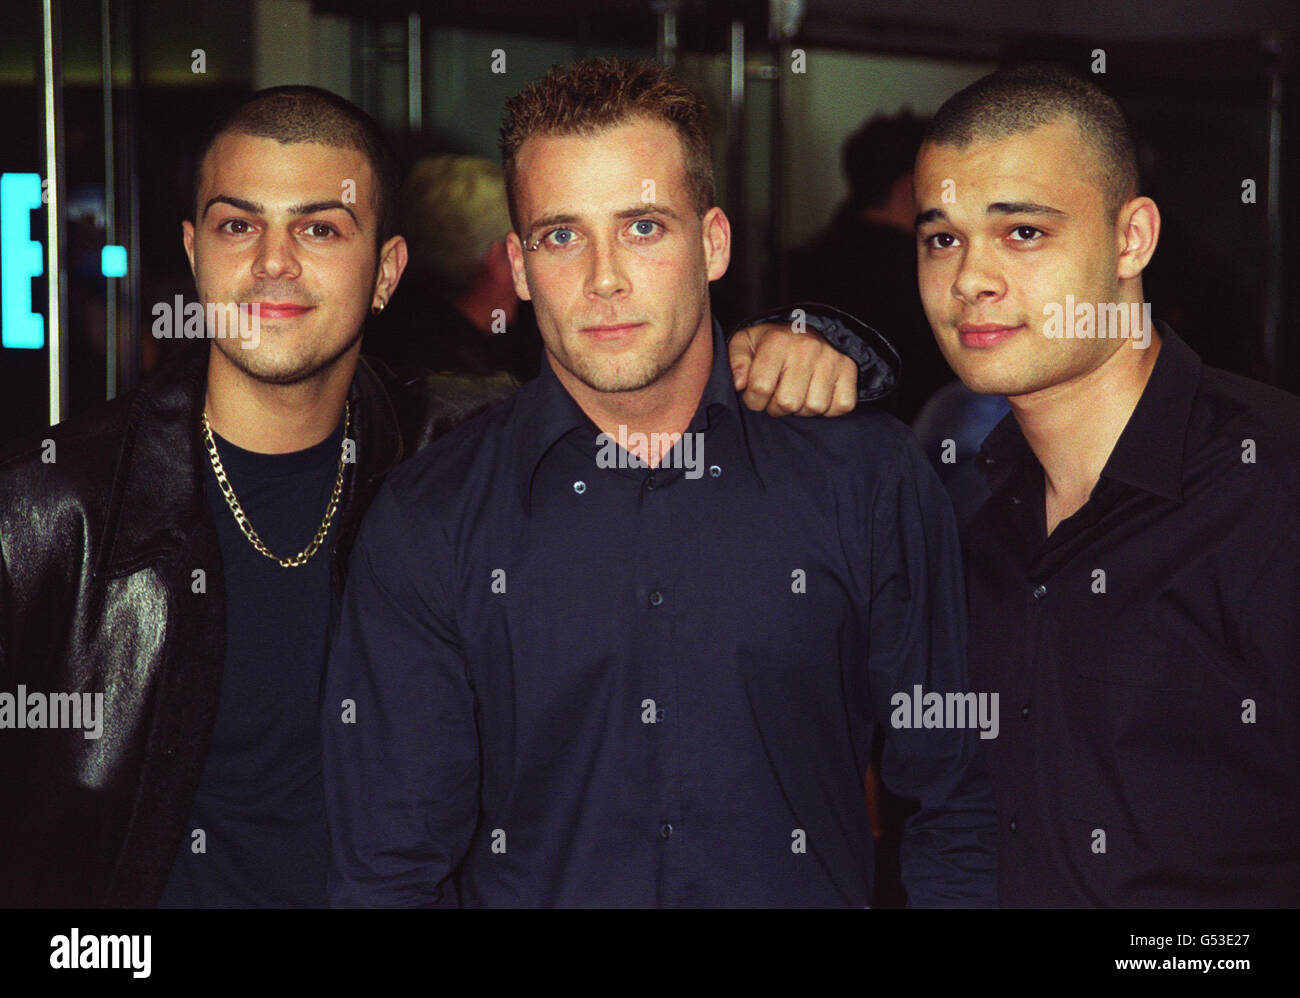 L-R: Abs Breen (Richard Breen), J Brown (Jason Brown) and Sean Conlon of the pop band Five, arrive for the premiere of the film X-Men, at The Odeon cinema in Leicester Square, London. Stock Photo